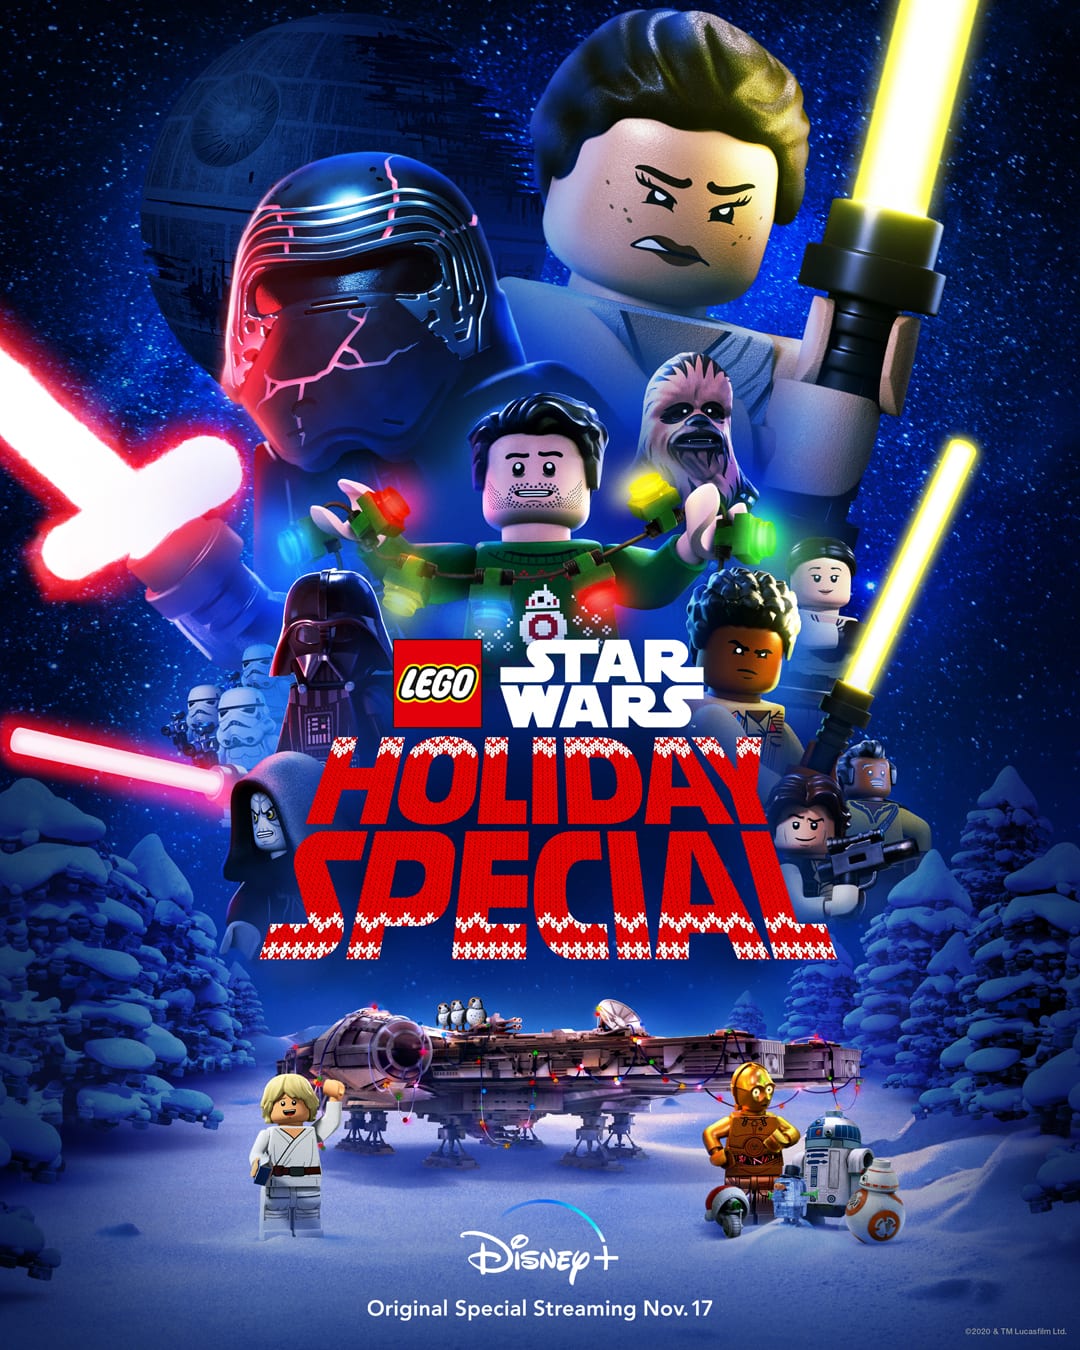 LEGO Star Wars Holiday Special Poster 